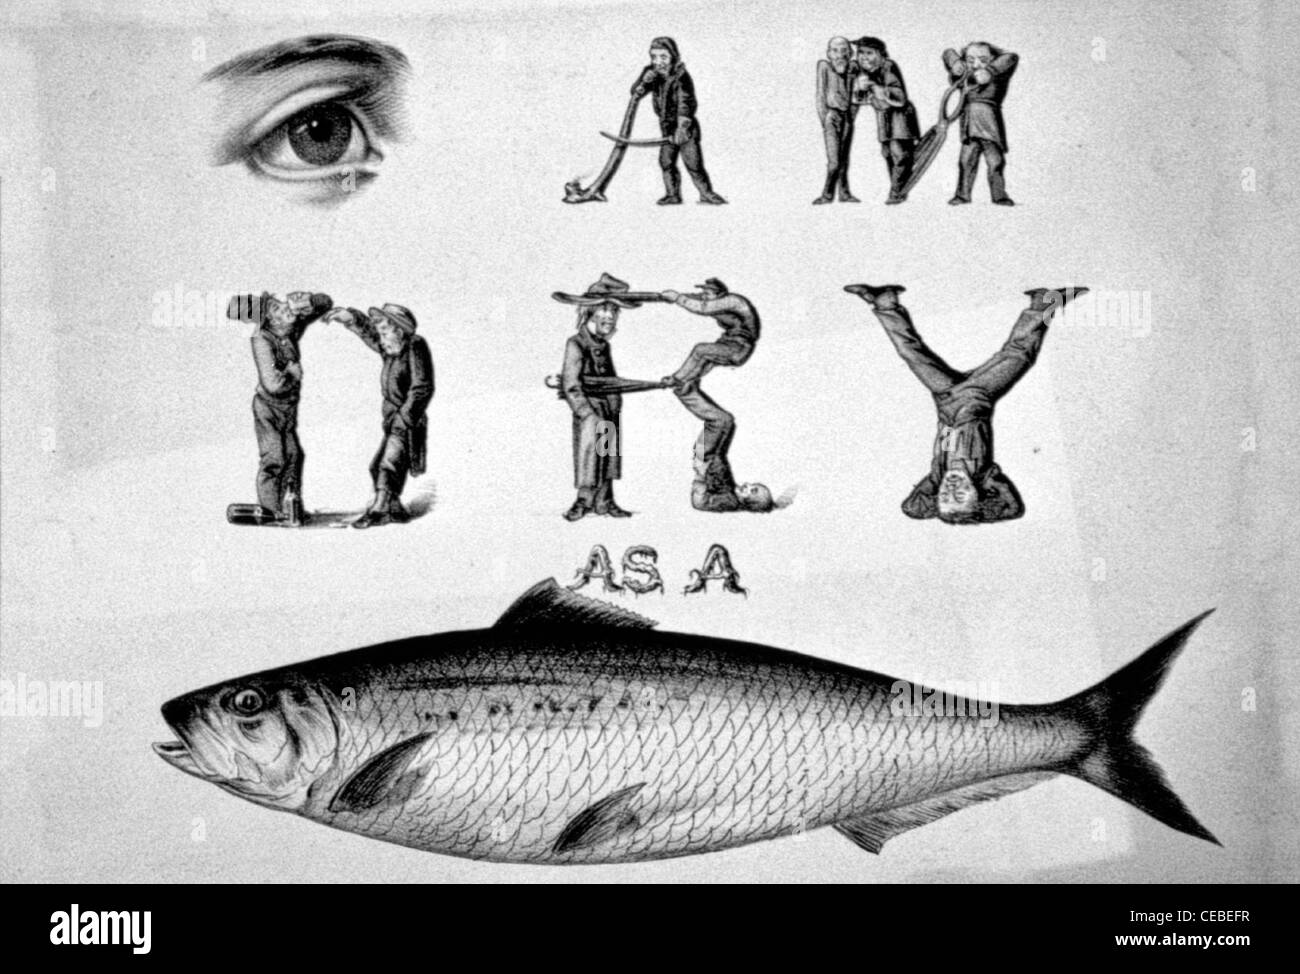 I am dry as a fish Illustration using eye for I and a fish for fish Stock Photo